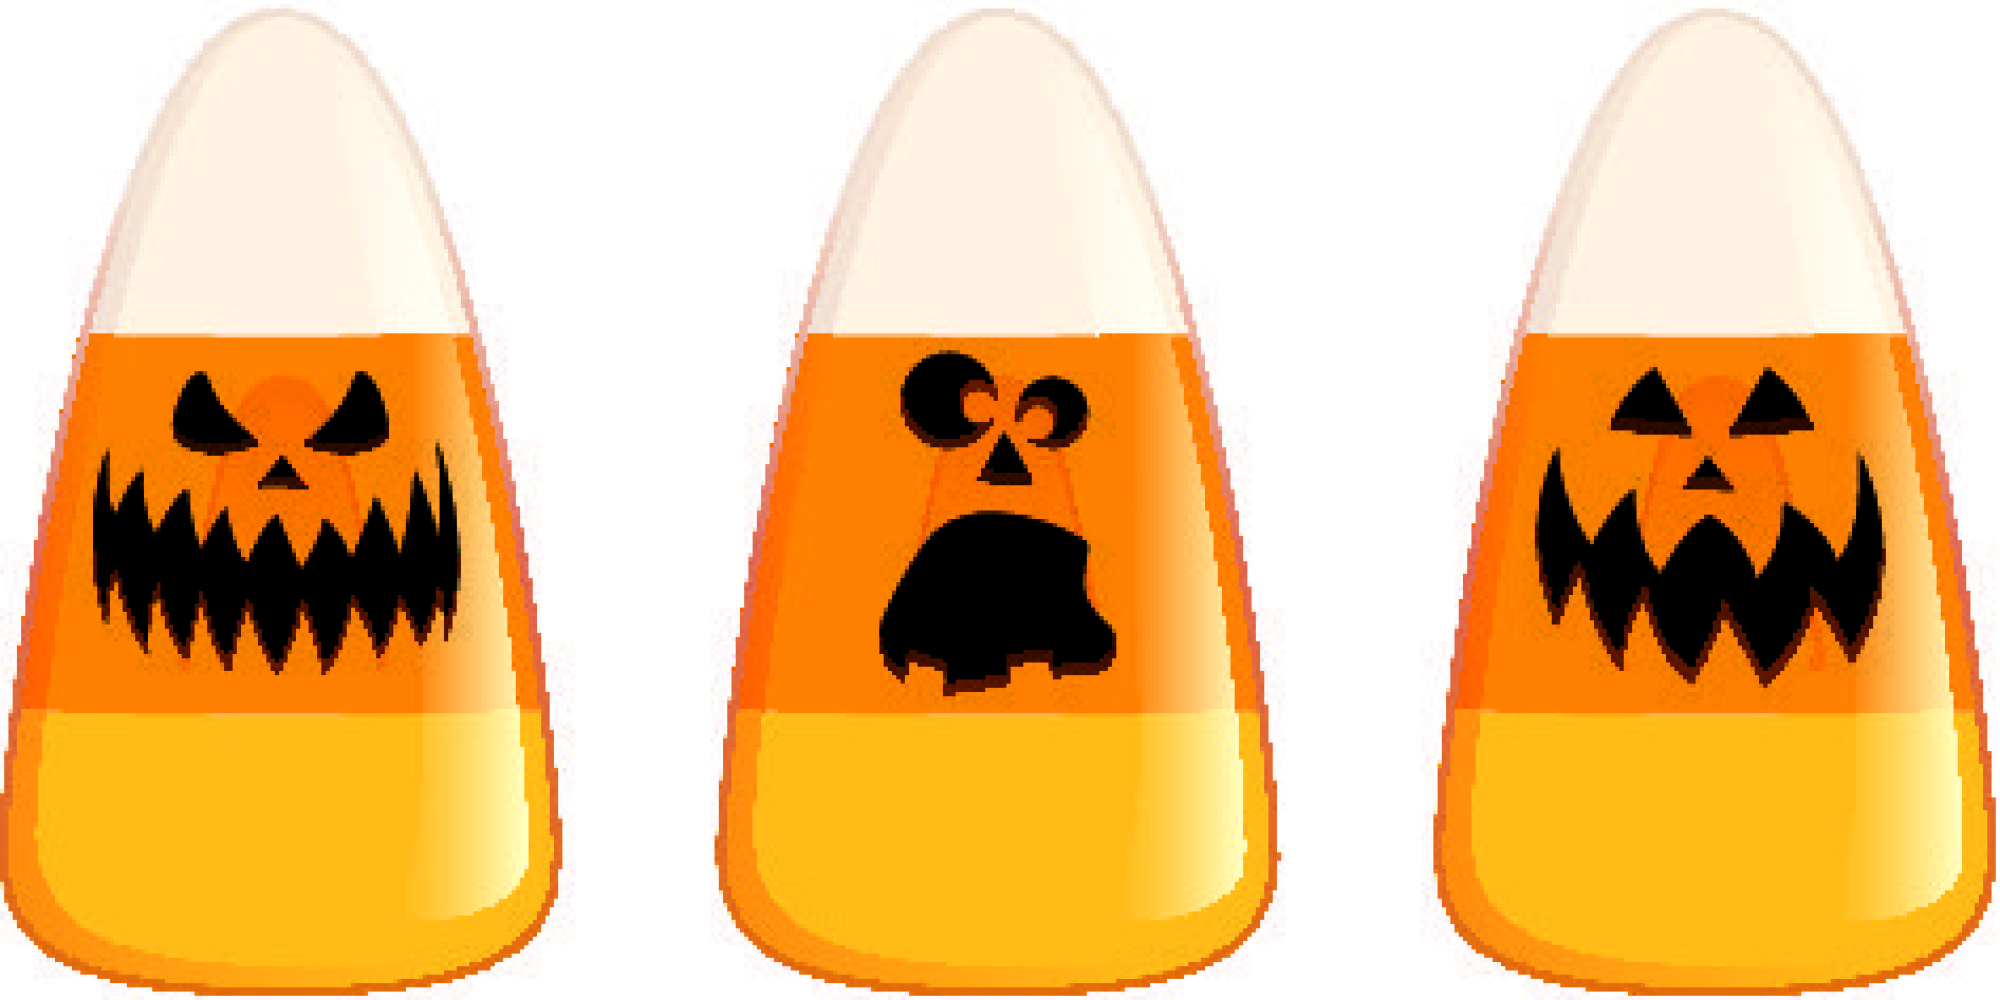 Candy Corn Images